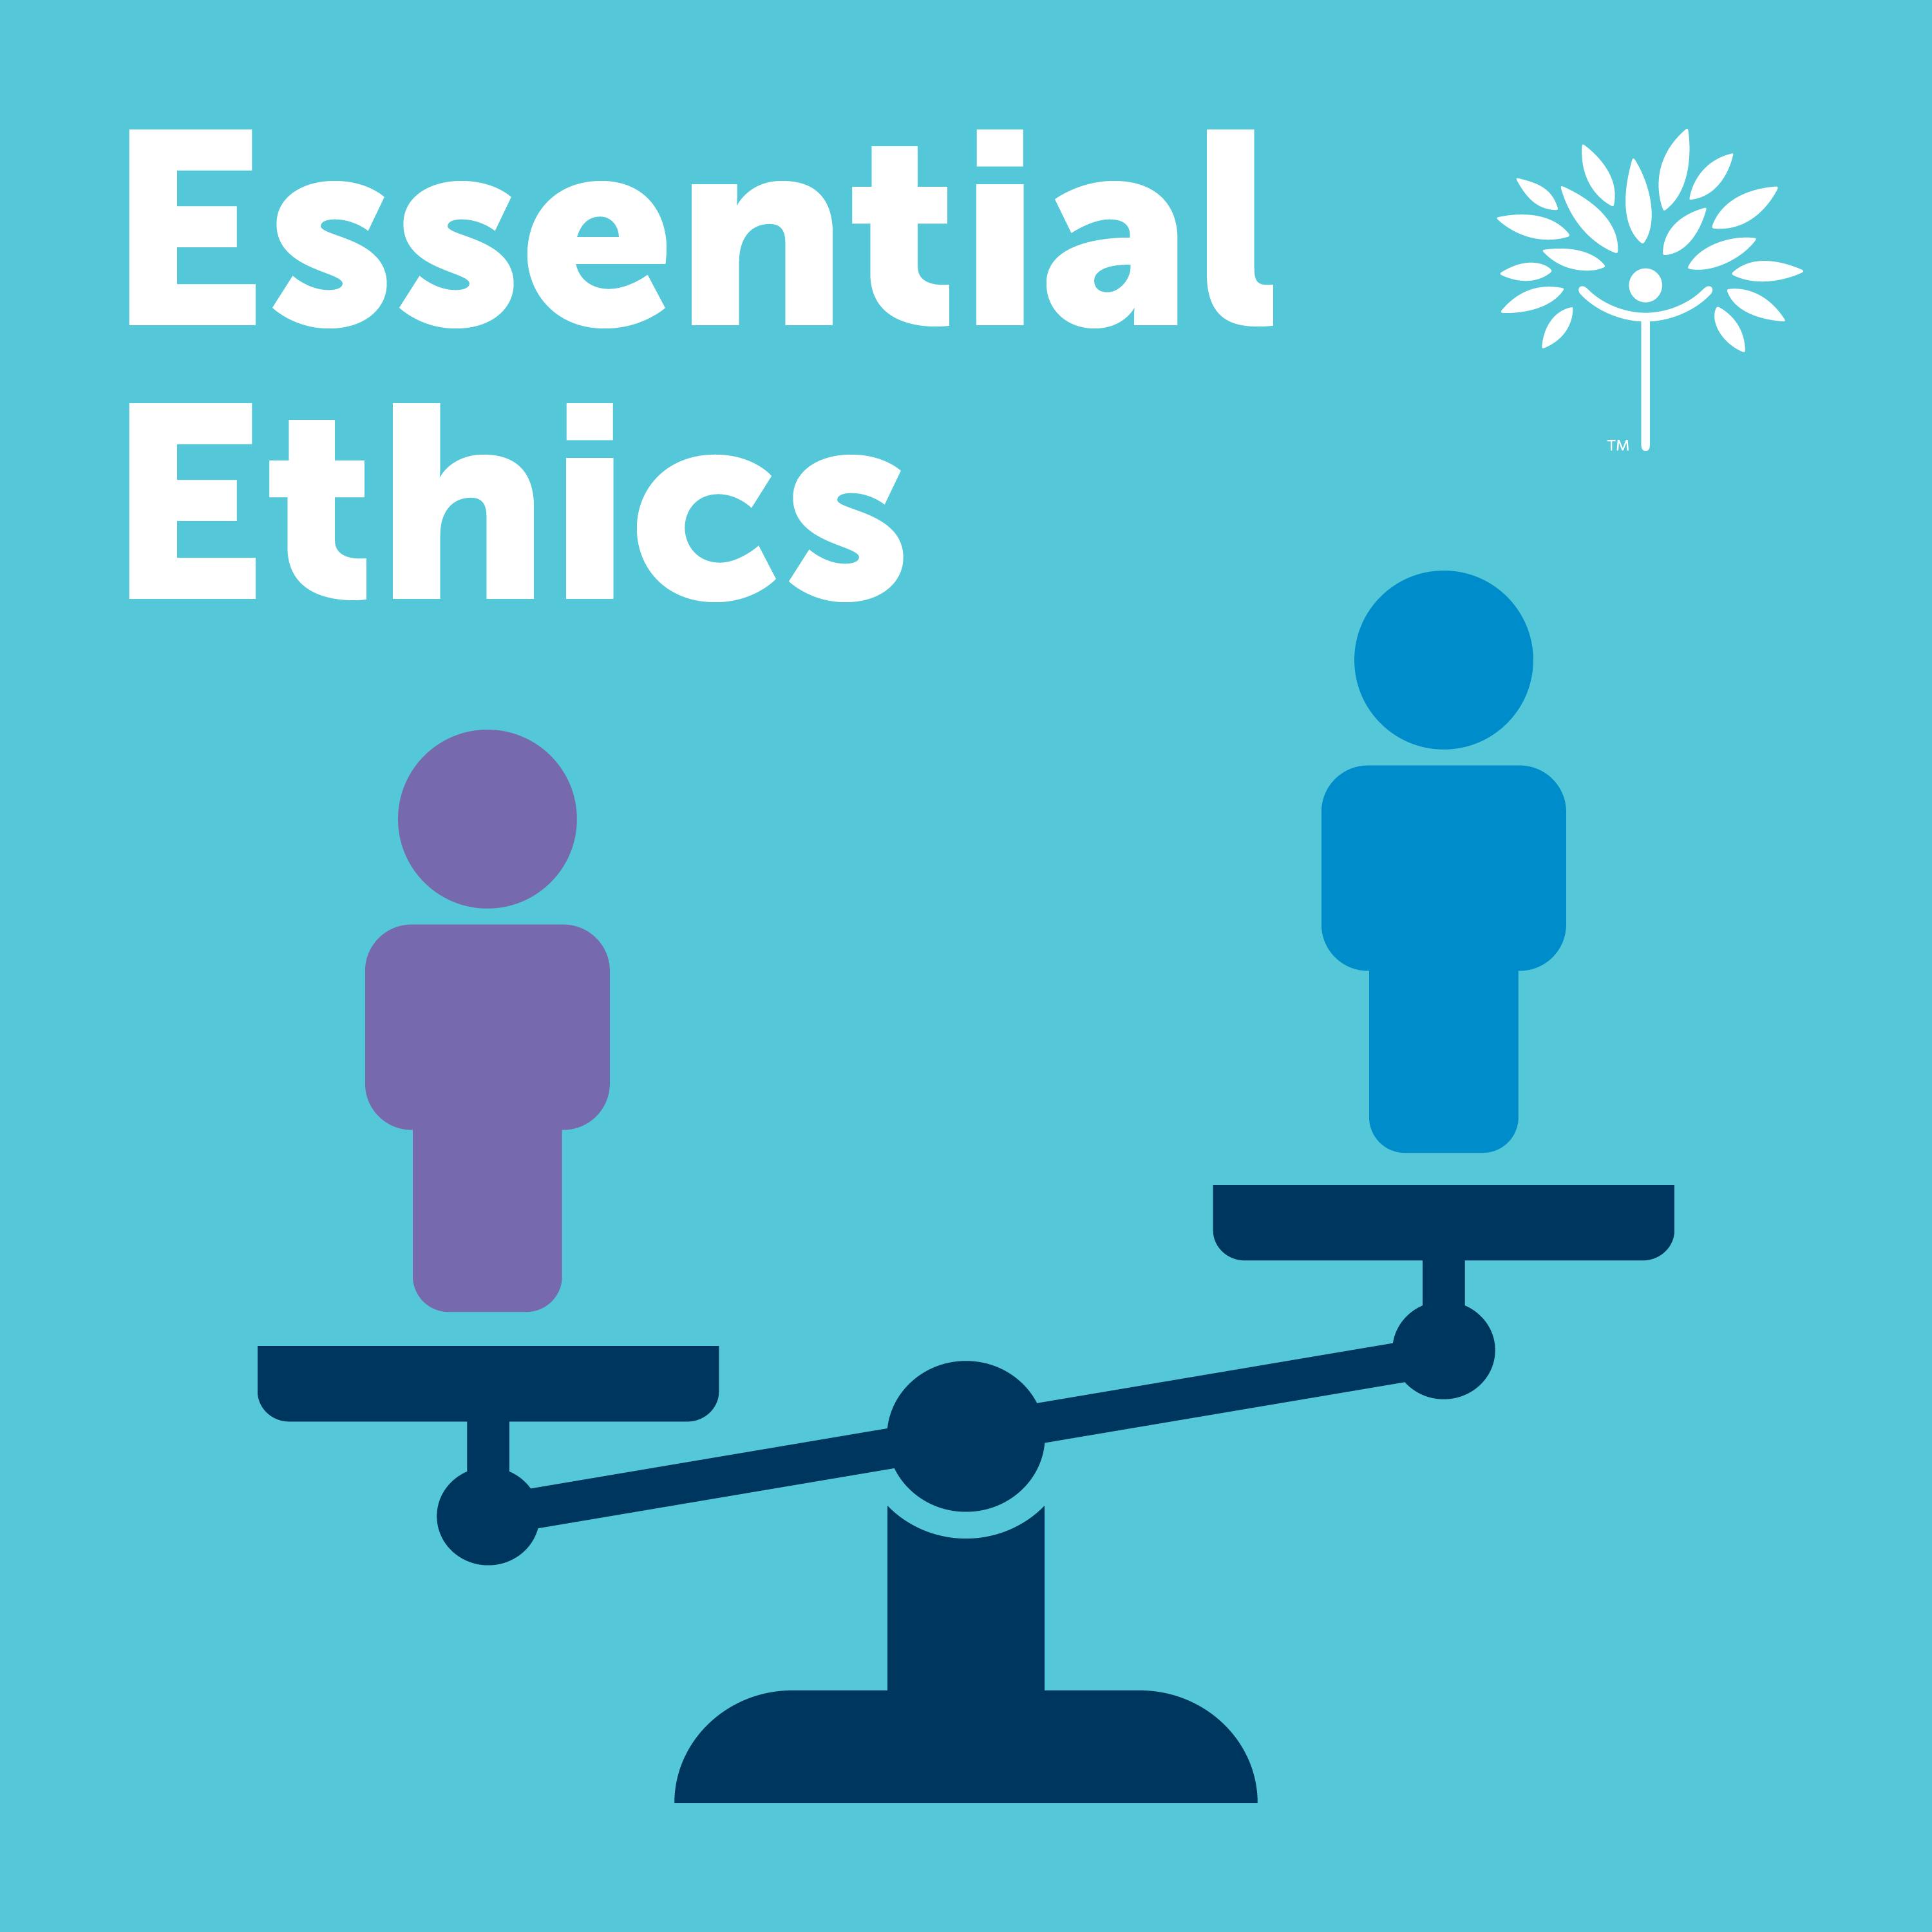 Clinical ethics in paediatric nursing: 2 Moral distress: what is it and what do we do about it?